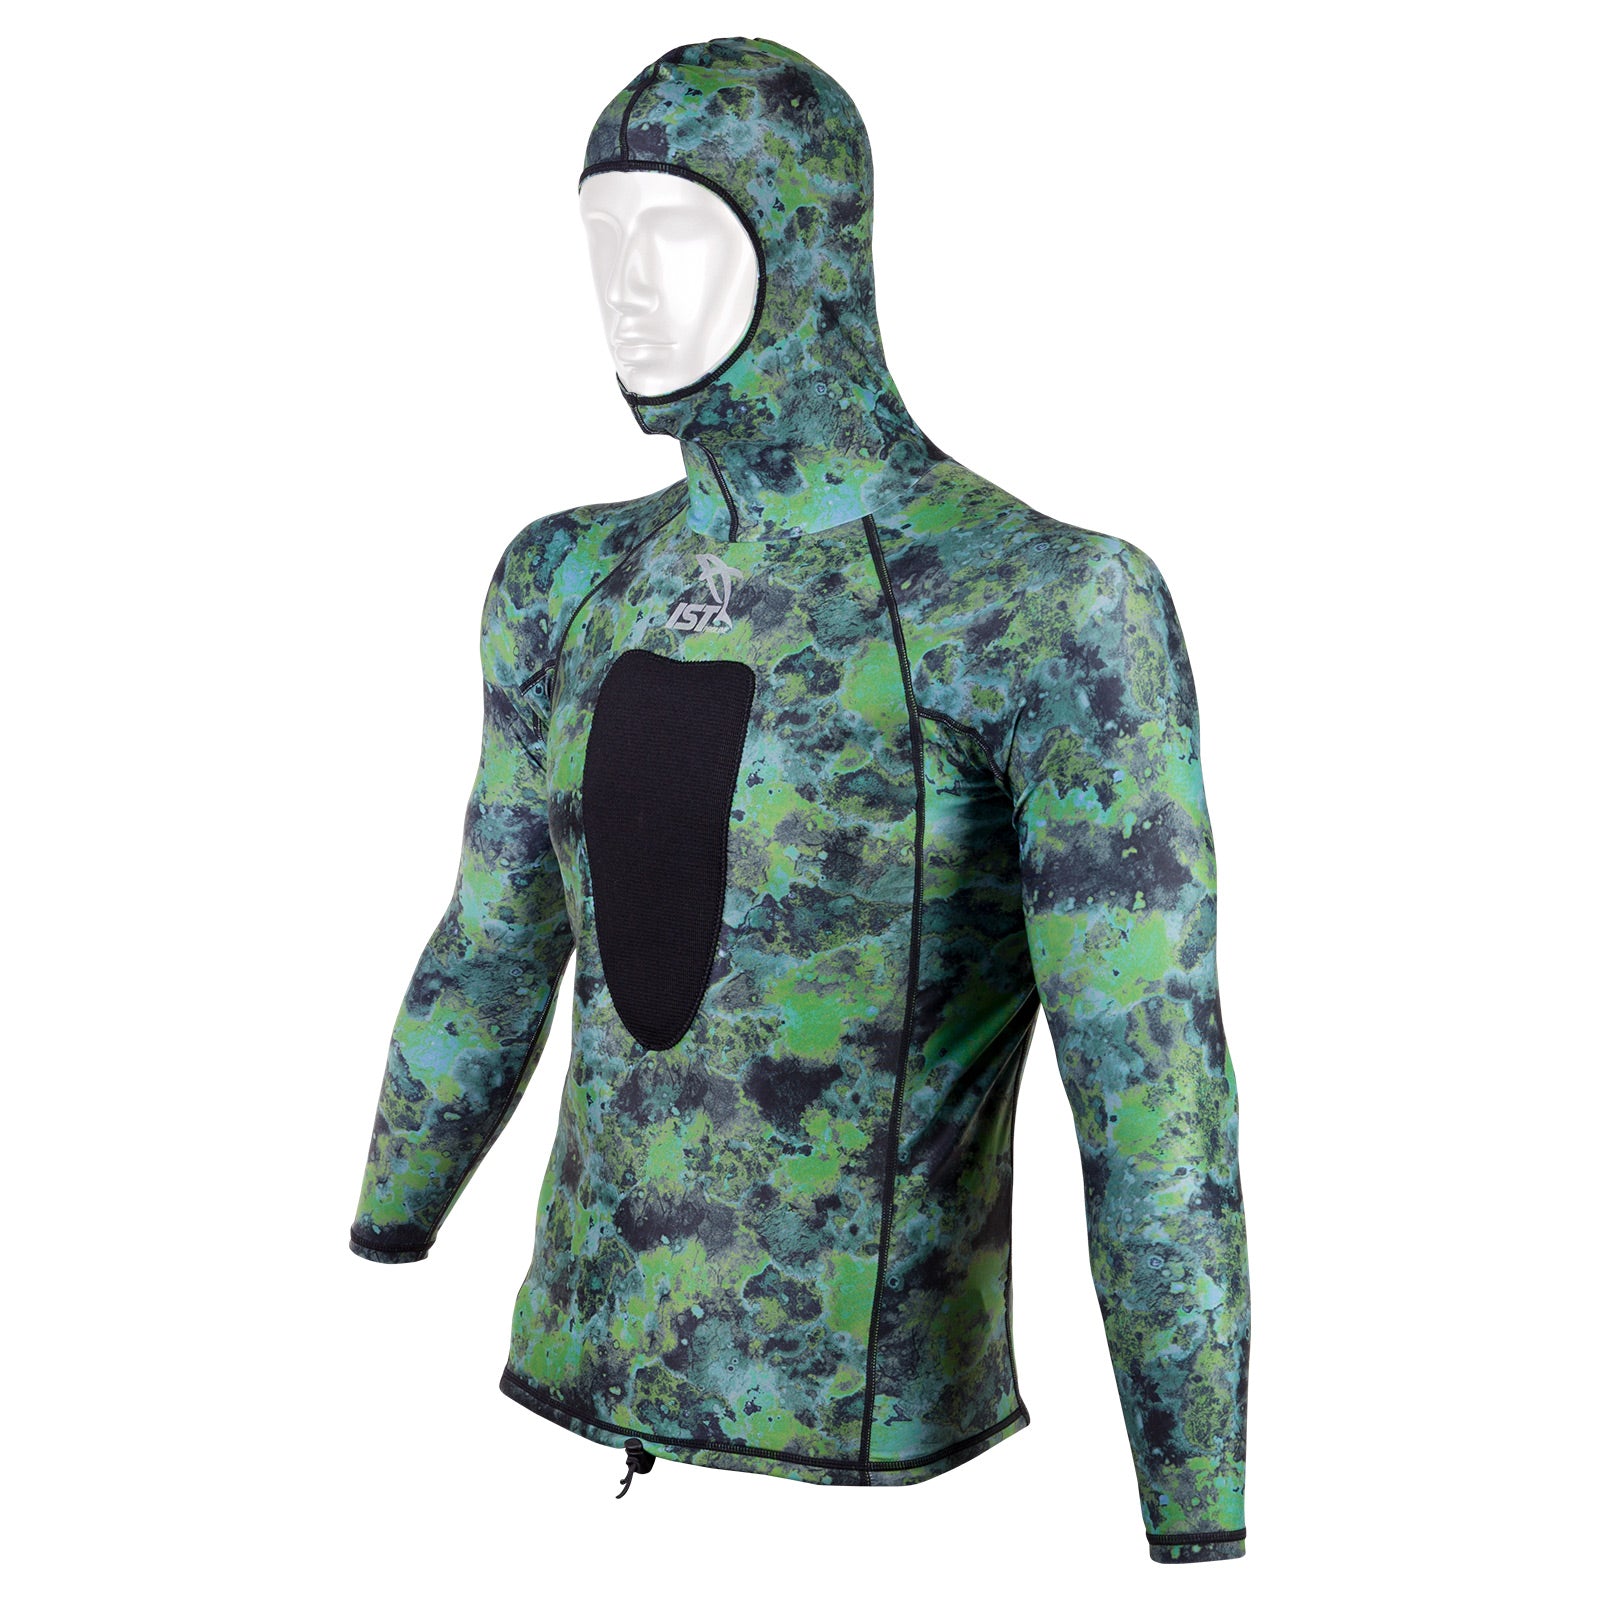 Puriguard Camouflage Hooded Suit